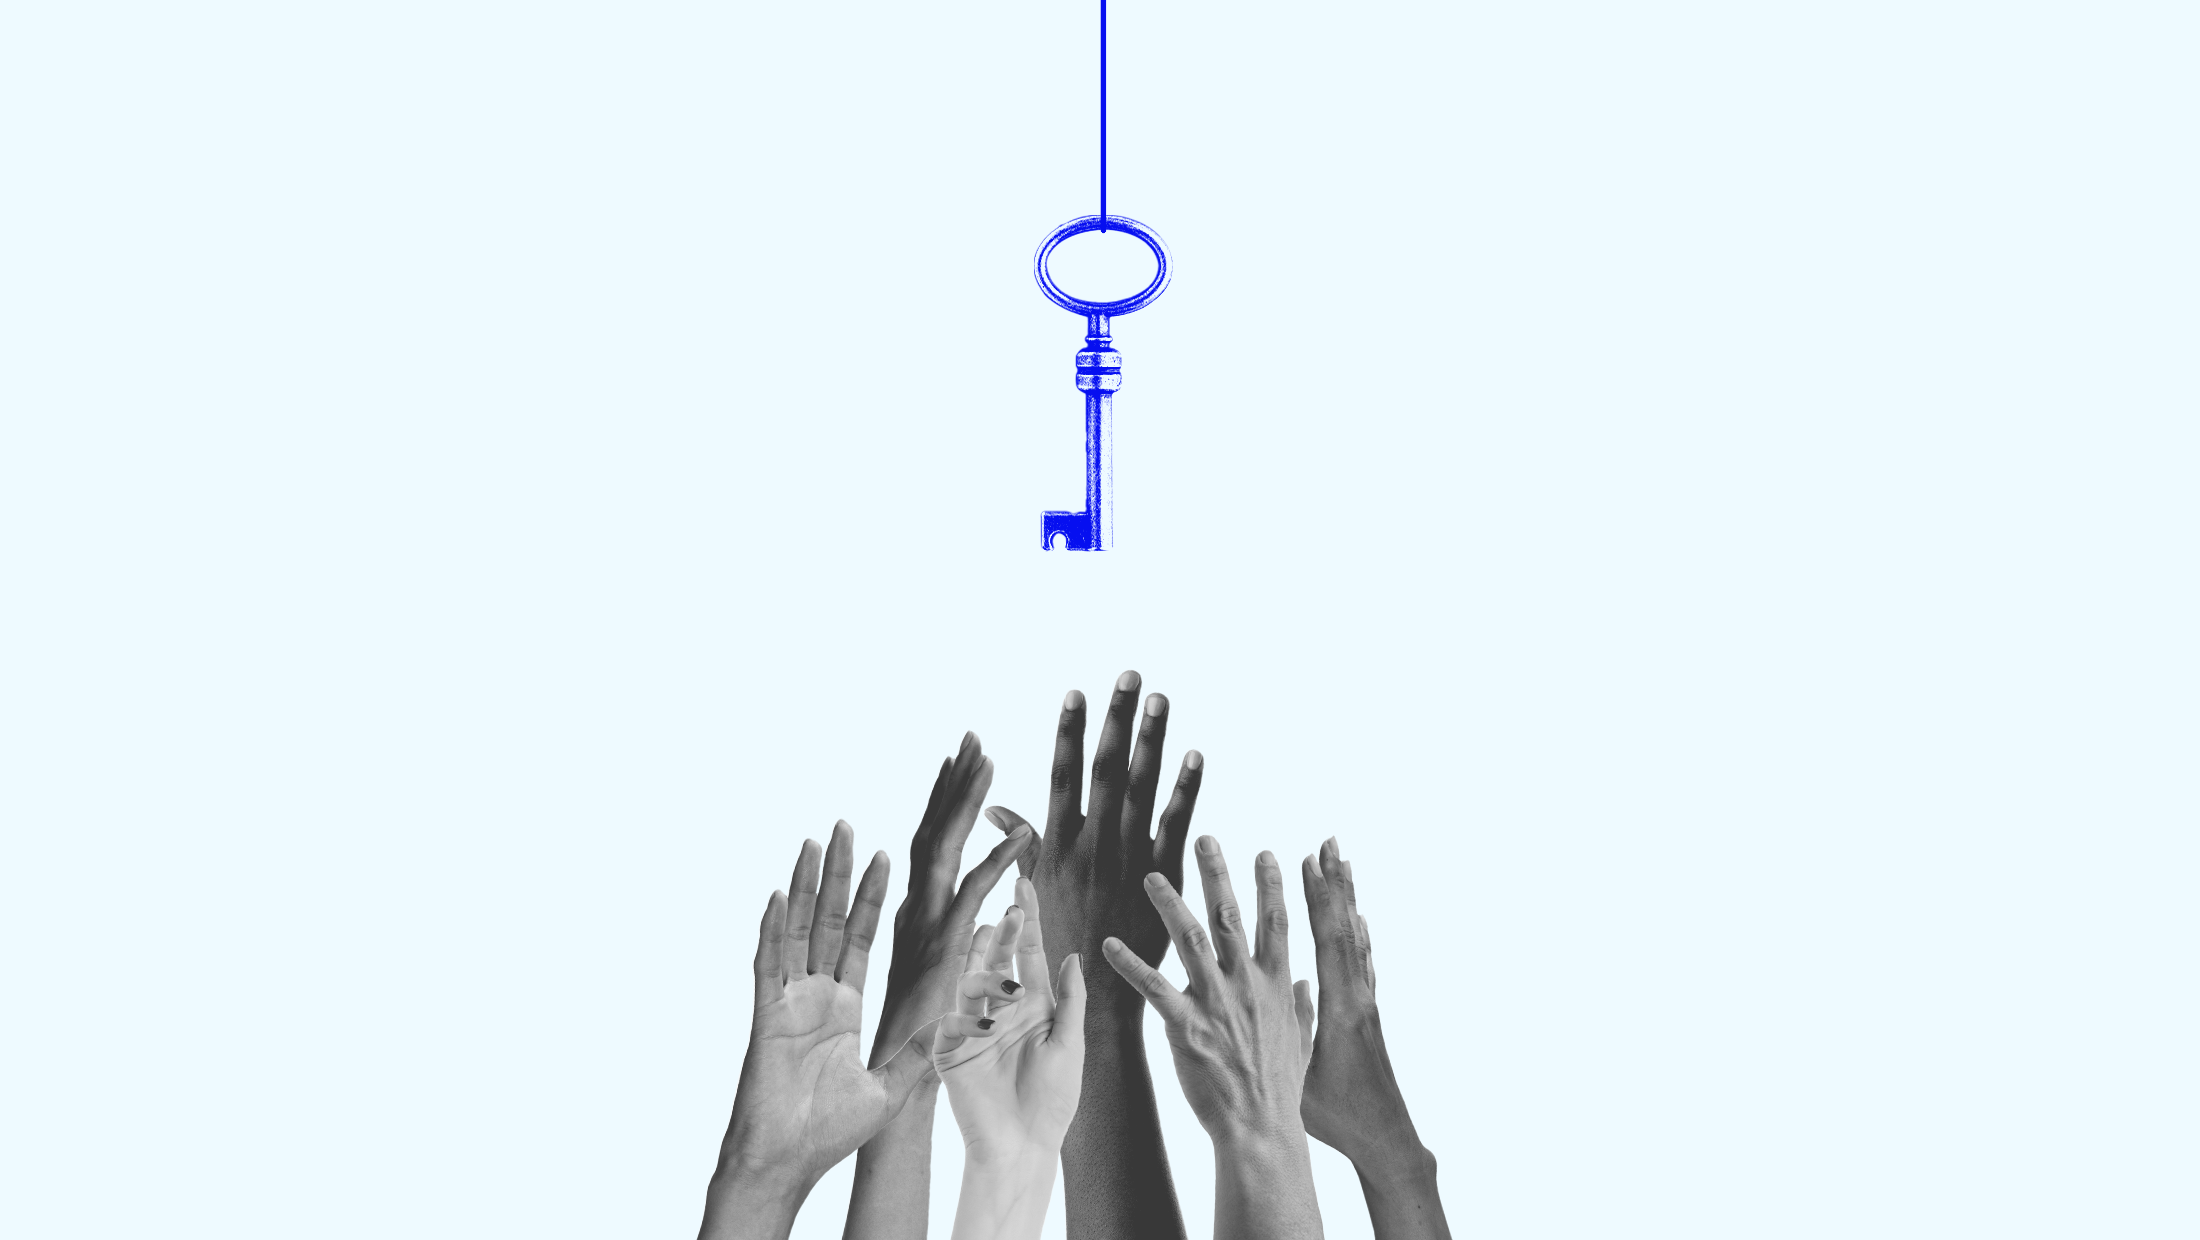 Six hands in black and white reaching up to grab a blue key hanging from the top over a light blue background.